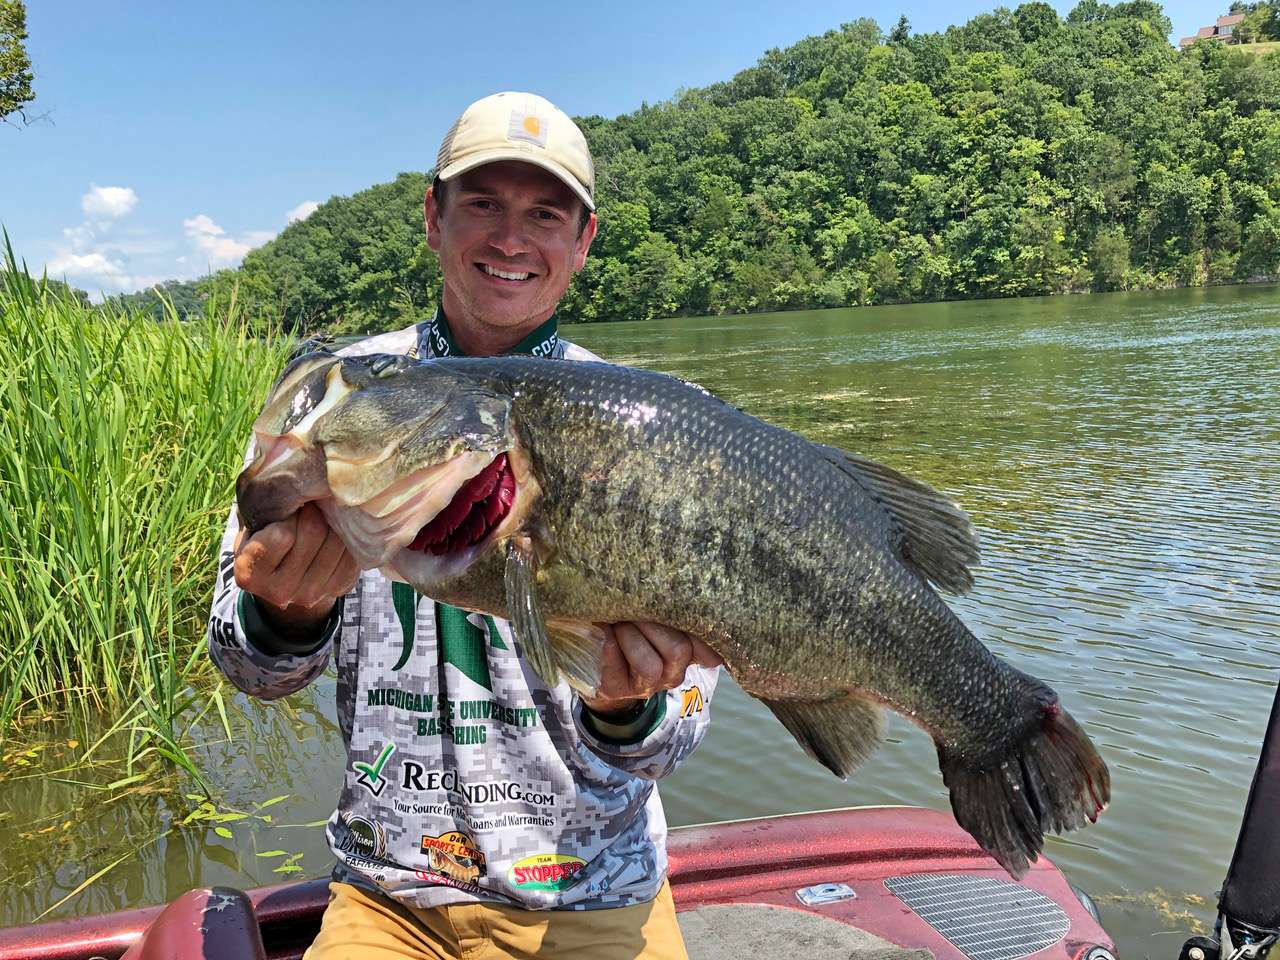 Riley Welch of Michigan State fished alone because his regular partner had a new career obligation, so Welch landed this 9 pound 15 ounce mega toad by himself. 